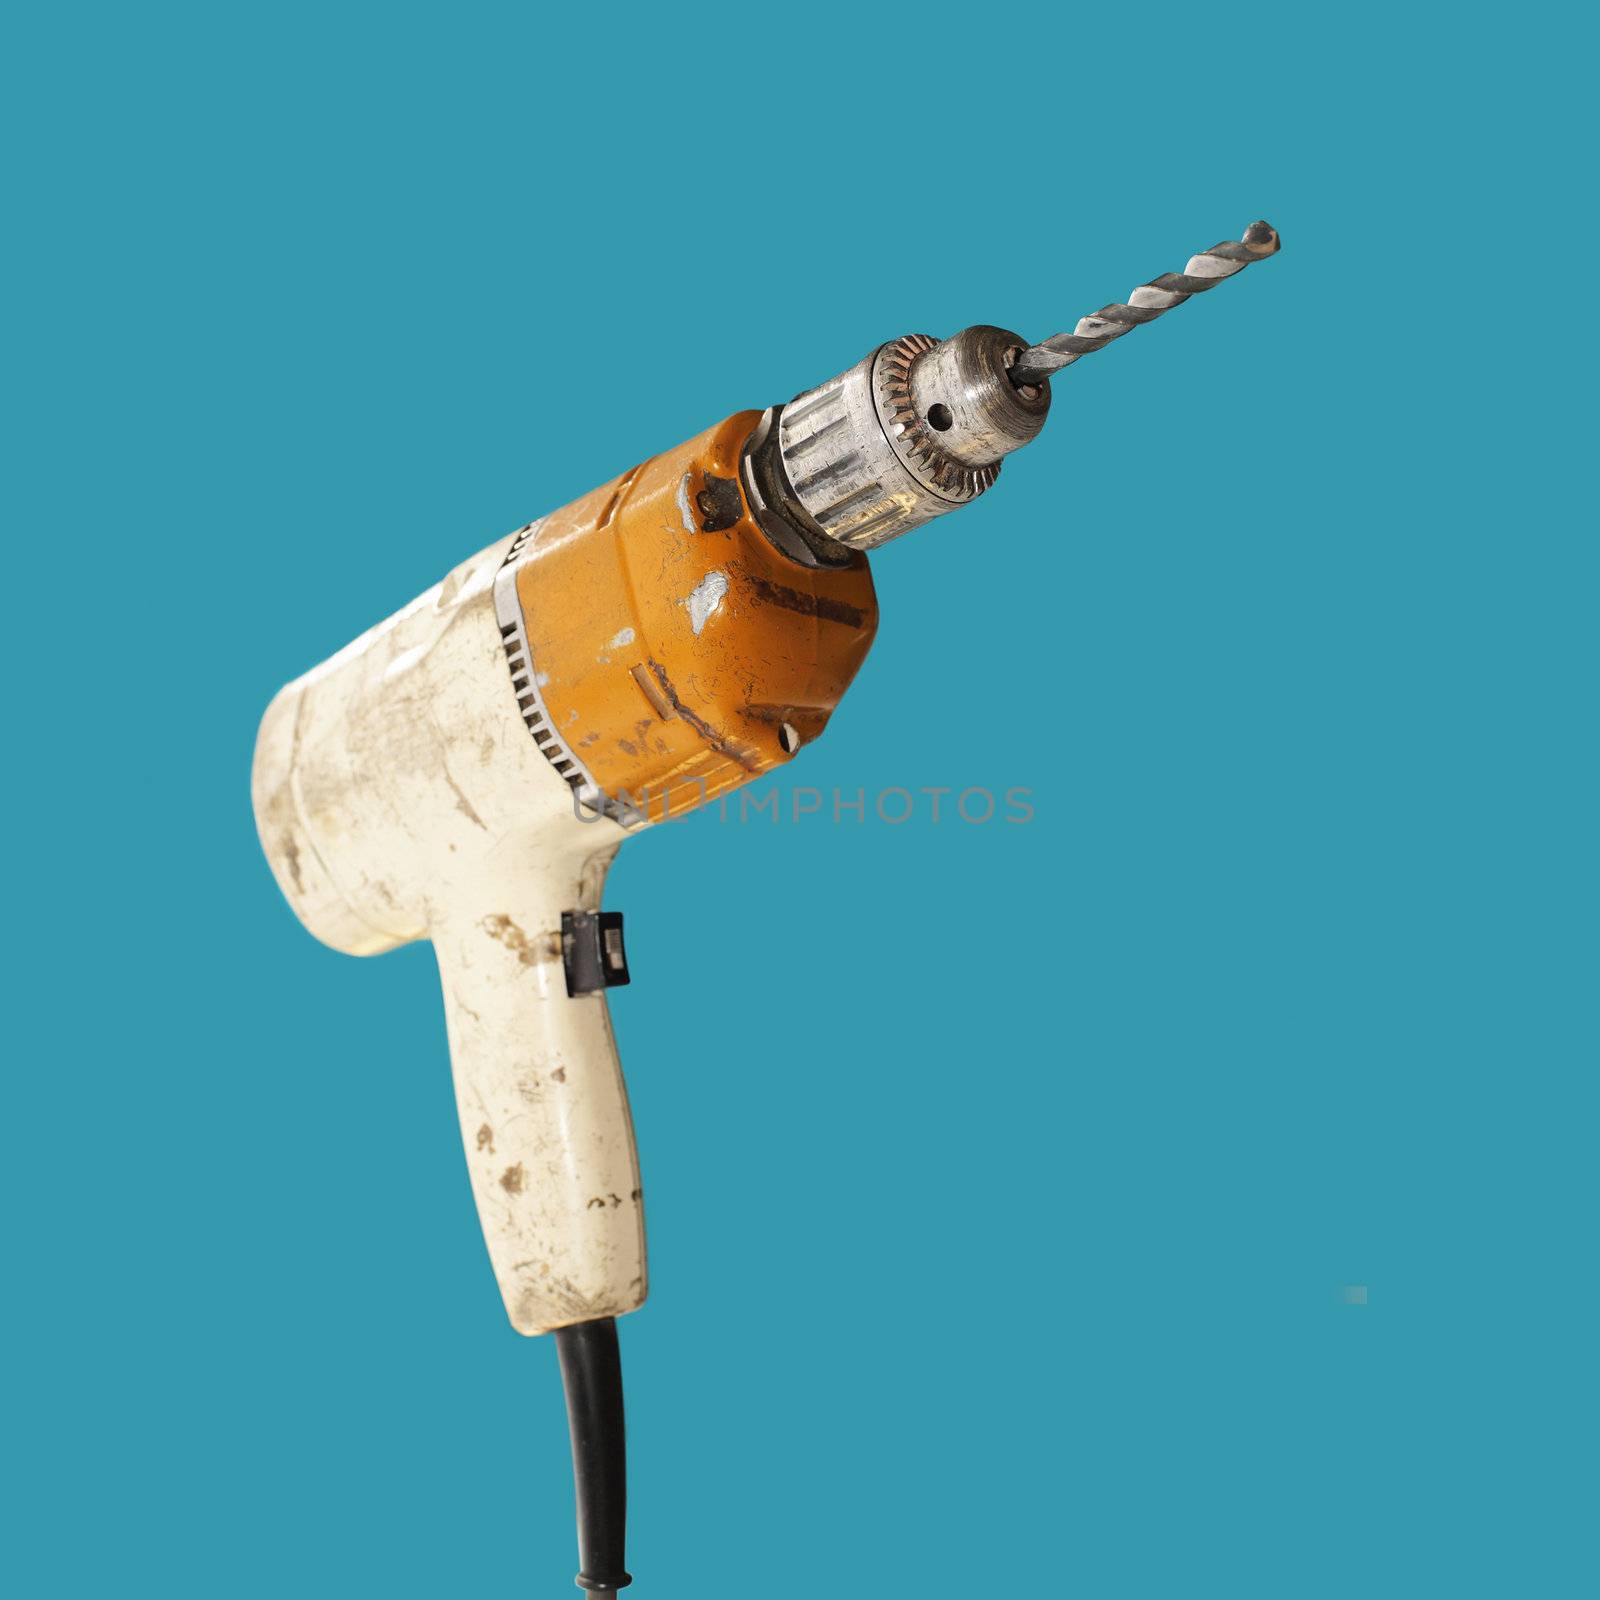 Electric drill by Stocksnapper